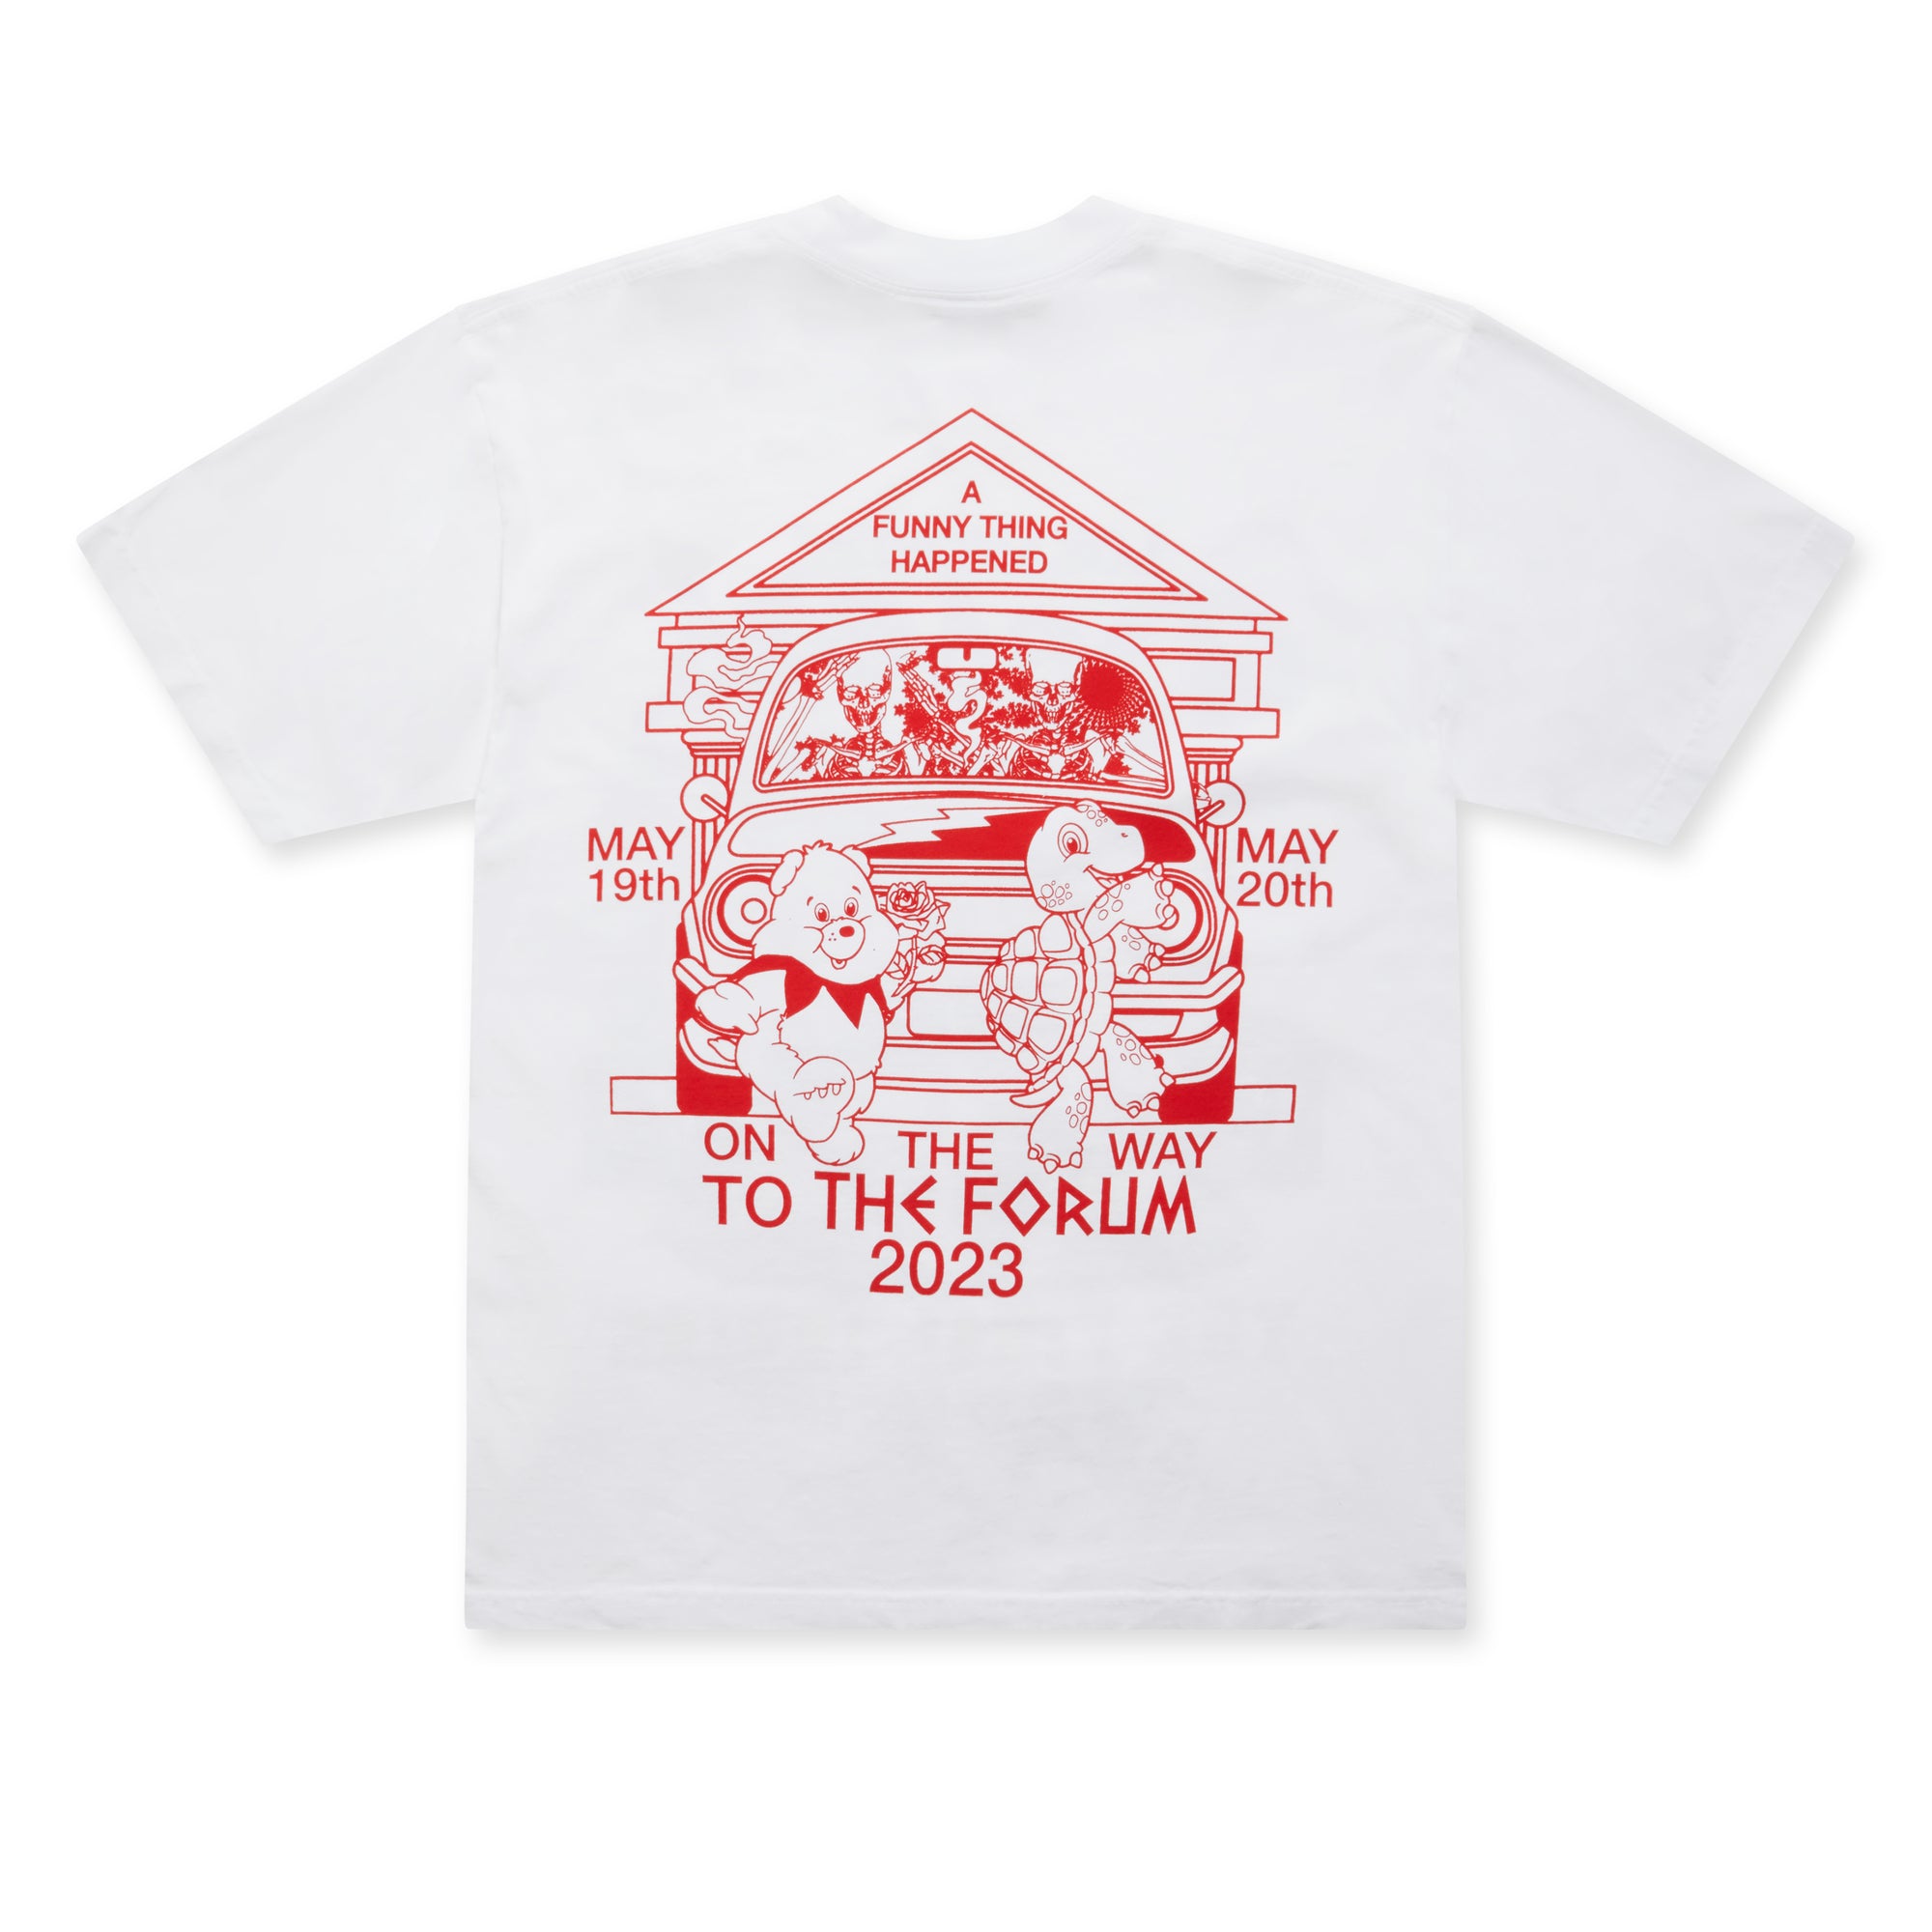 Online Ceramics - Dosers ’The Final Inning’ Tee - (White) view 2